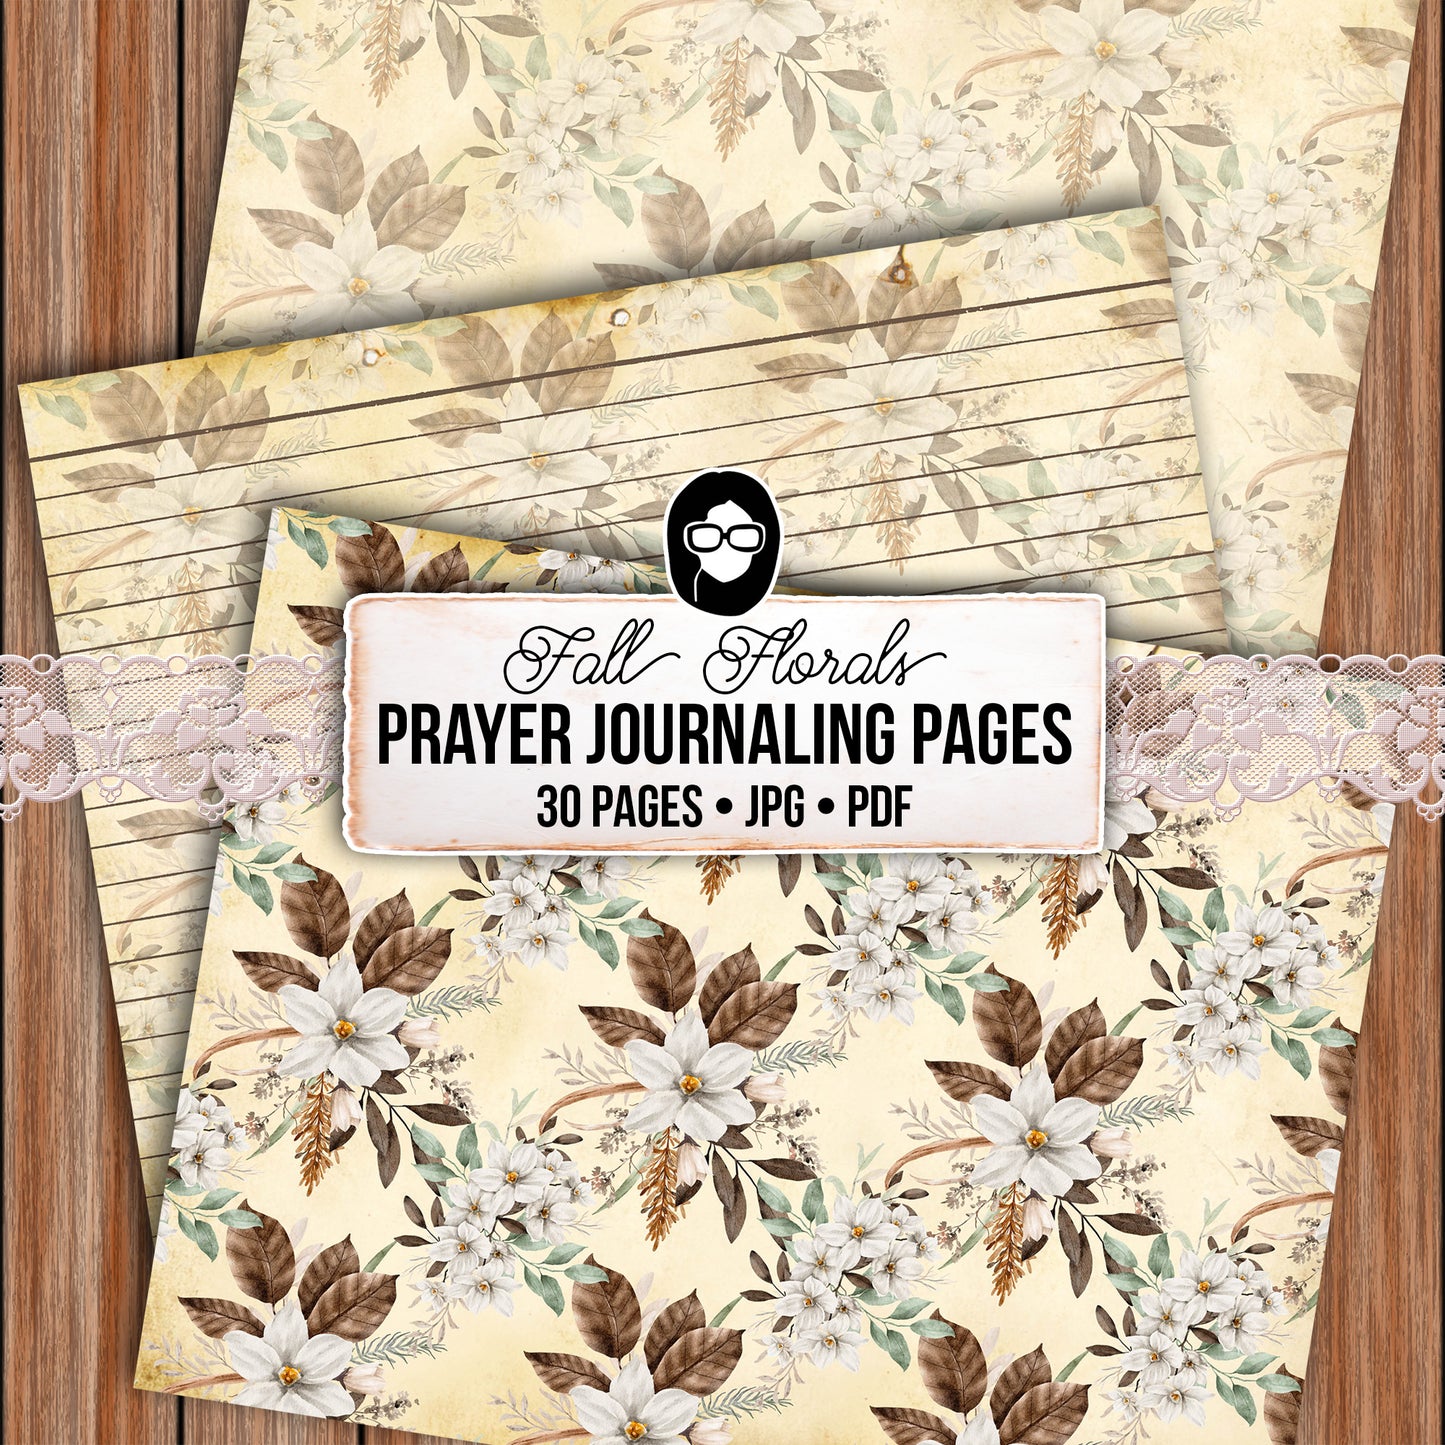 Fall Bible Journal Pages, Prayer Journal For Women -28pg Digital Download- Prayer Quotes, Christian Verses, Lined Journaling Pages, Autumn